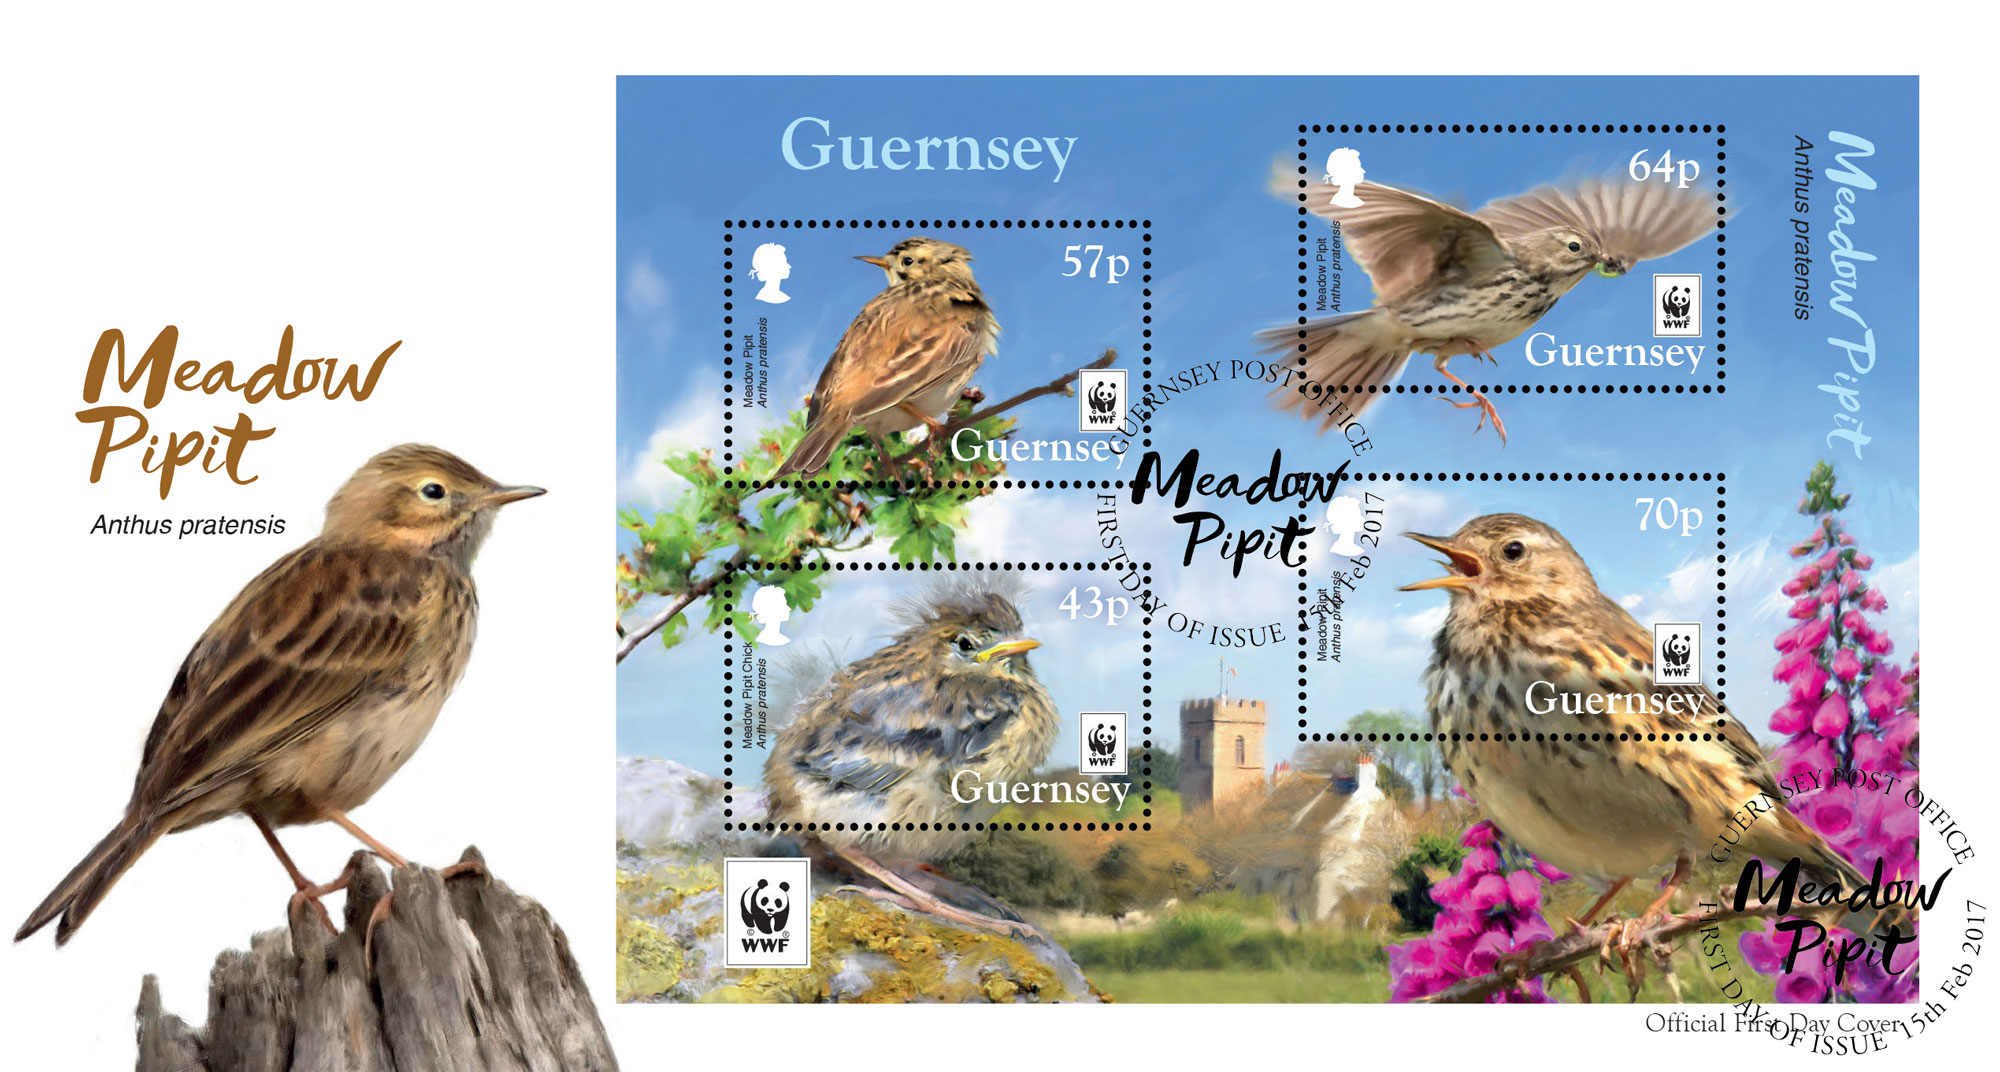 2017 WWFMeadow Pipit FDC with sheet